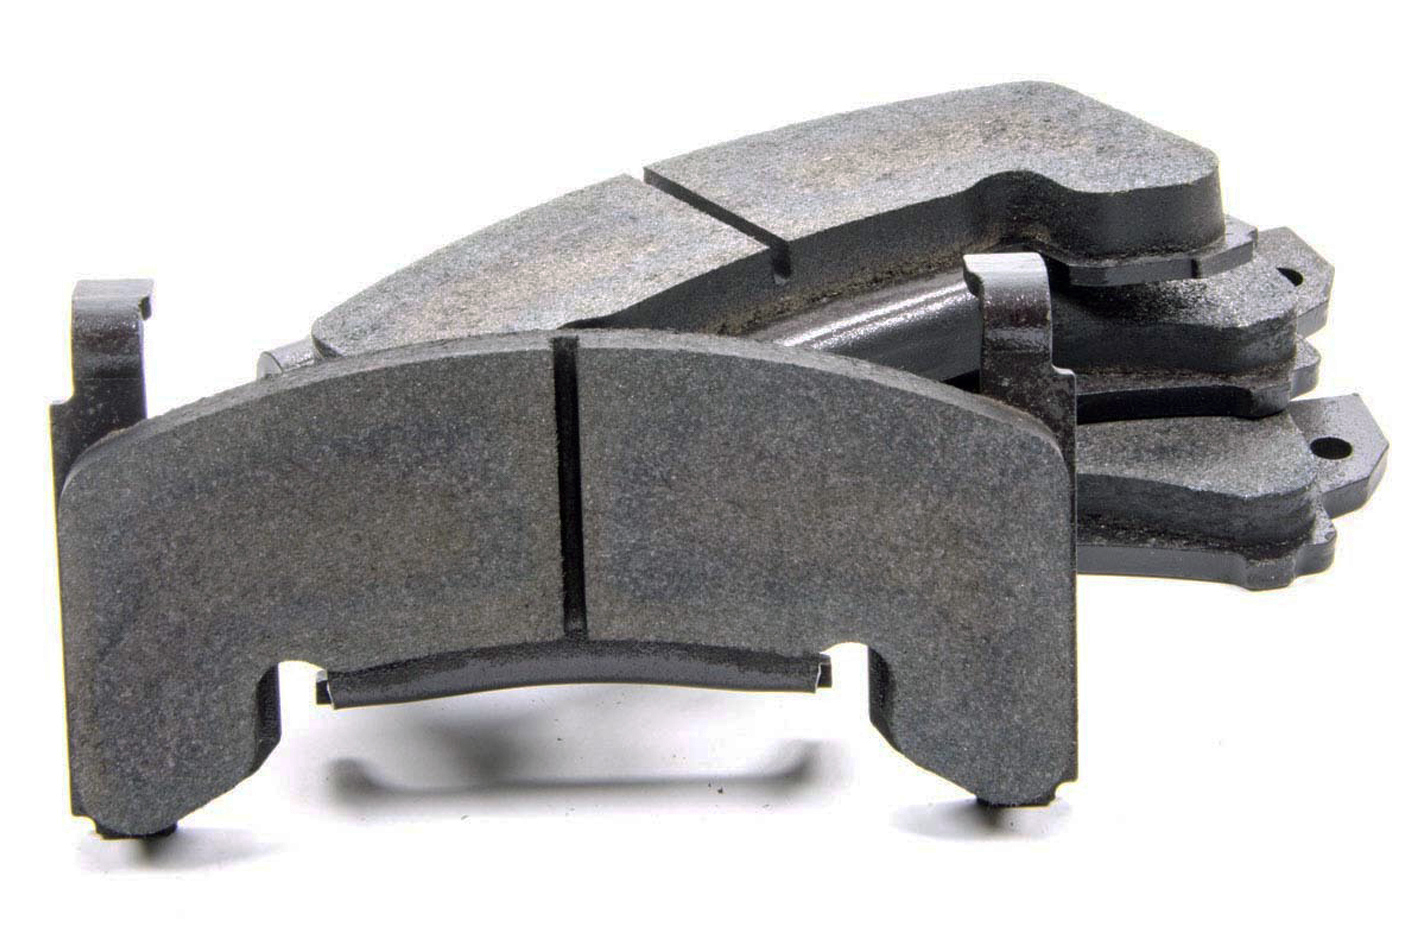 Wilwood 150-14778K Brake Pads, BP-30 Compound, Very High Friction, High Temperature, D 154 / GM-Metric, Kit